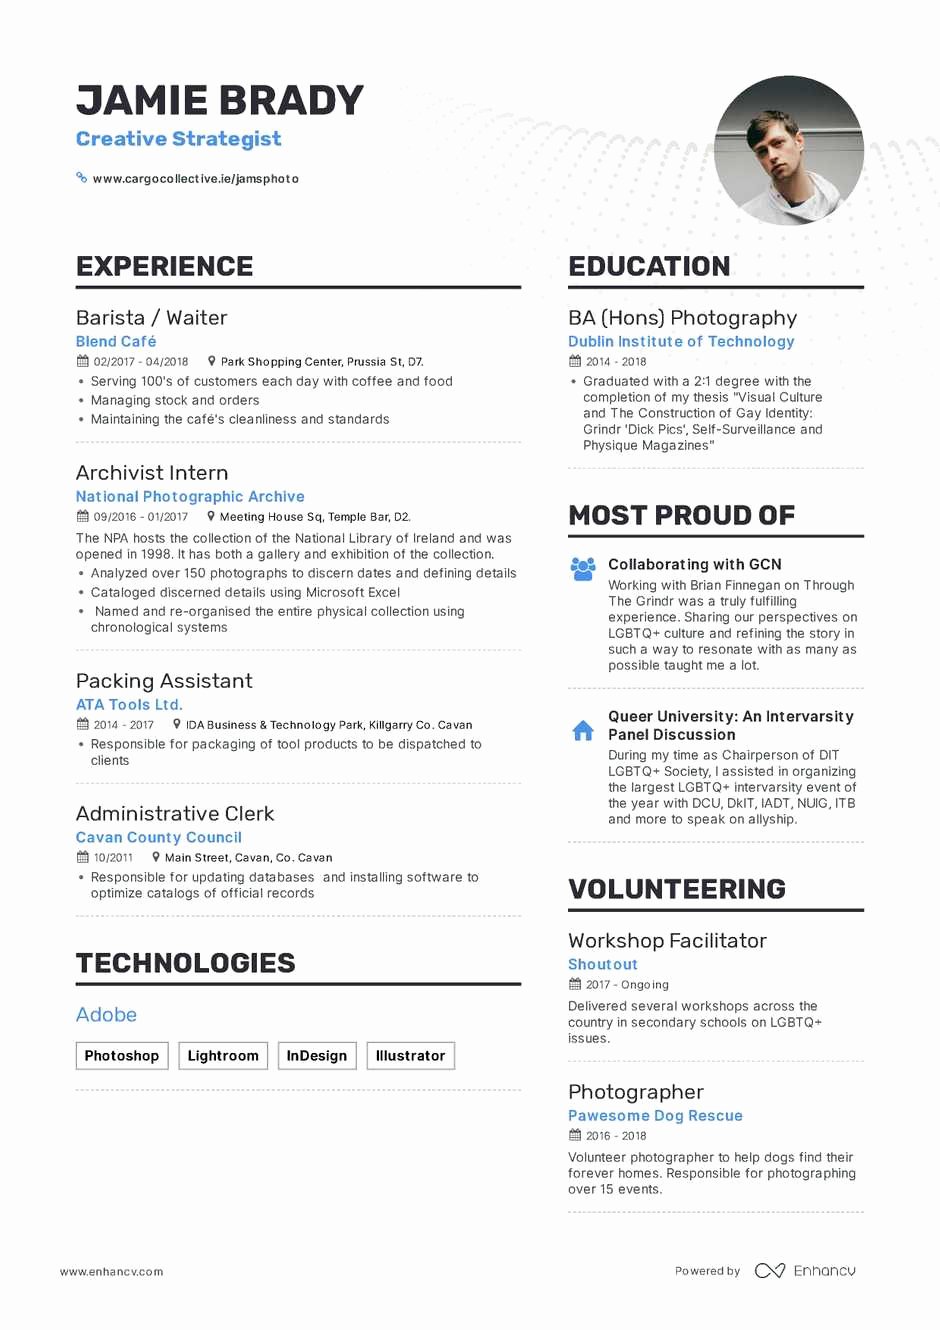 Resume format for Freshers Fresh the Best 2019 Fresher Resume formats and Samples